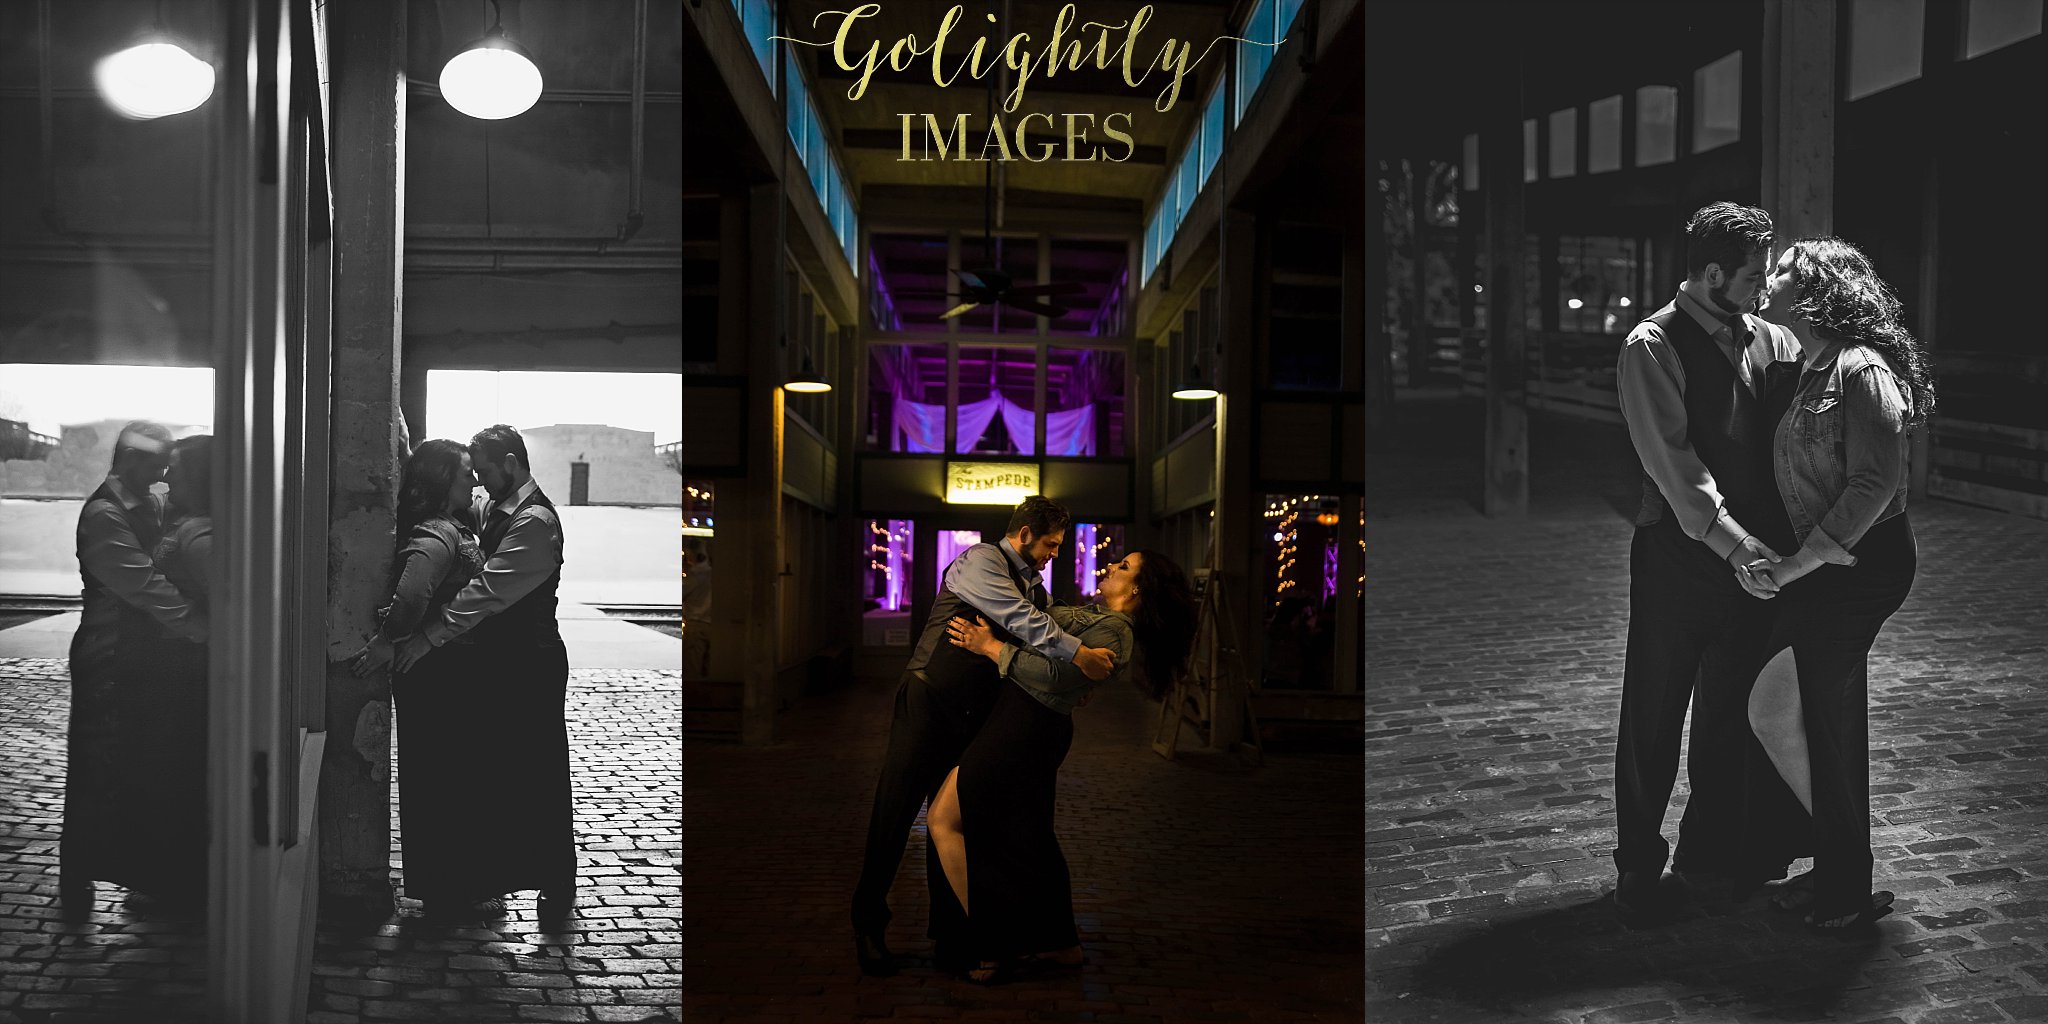 Engagements in Fort Worth by Golightly Images